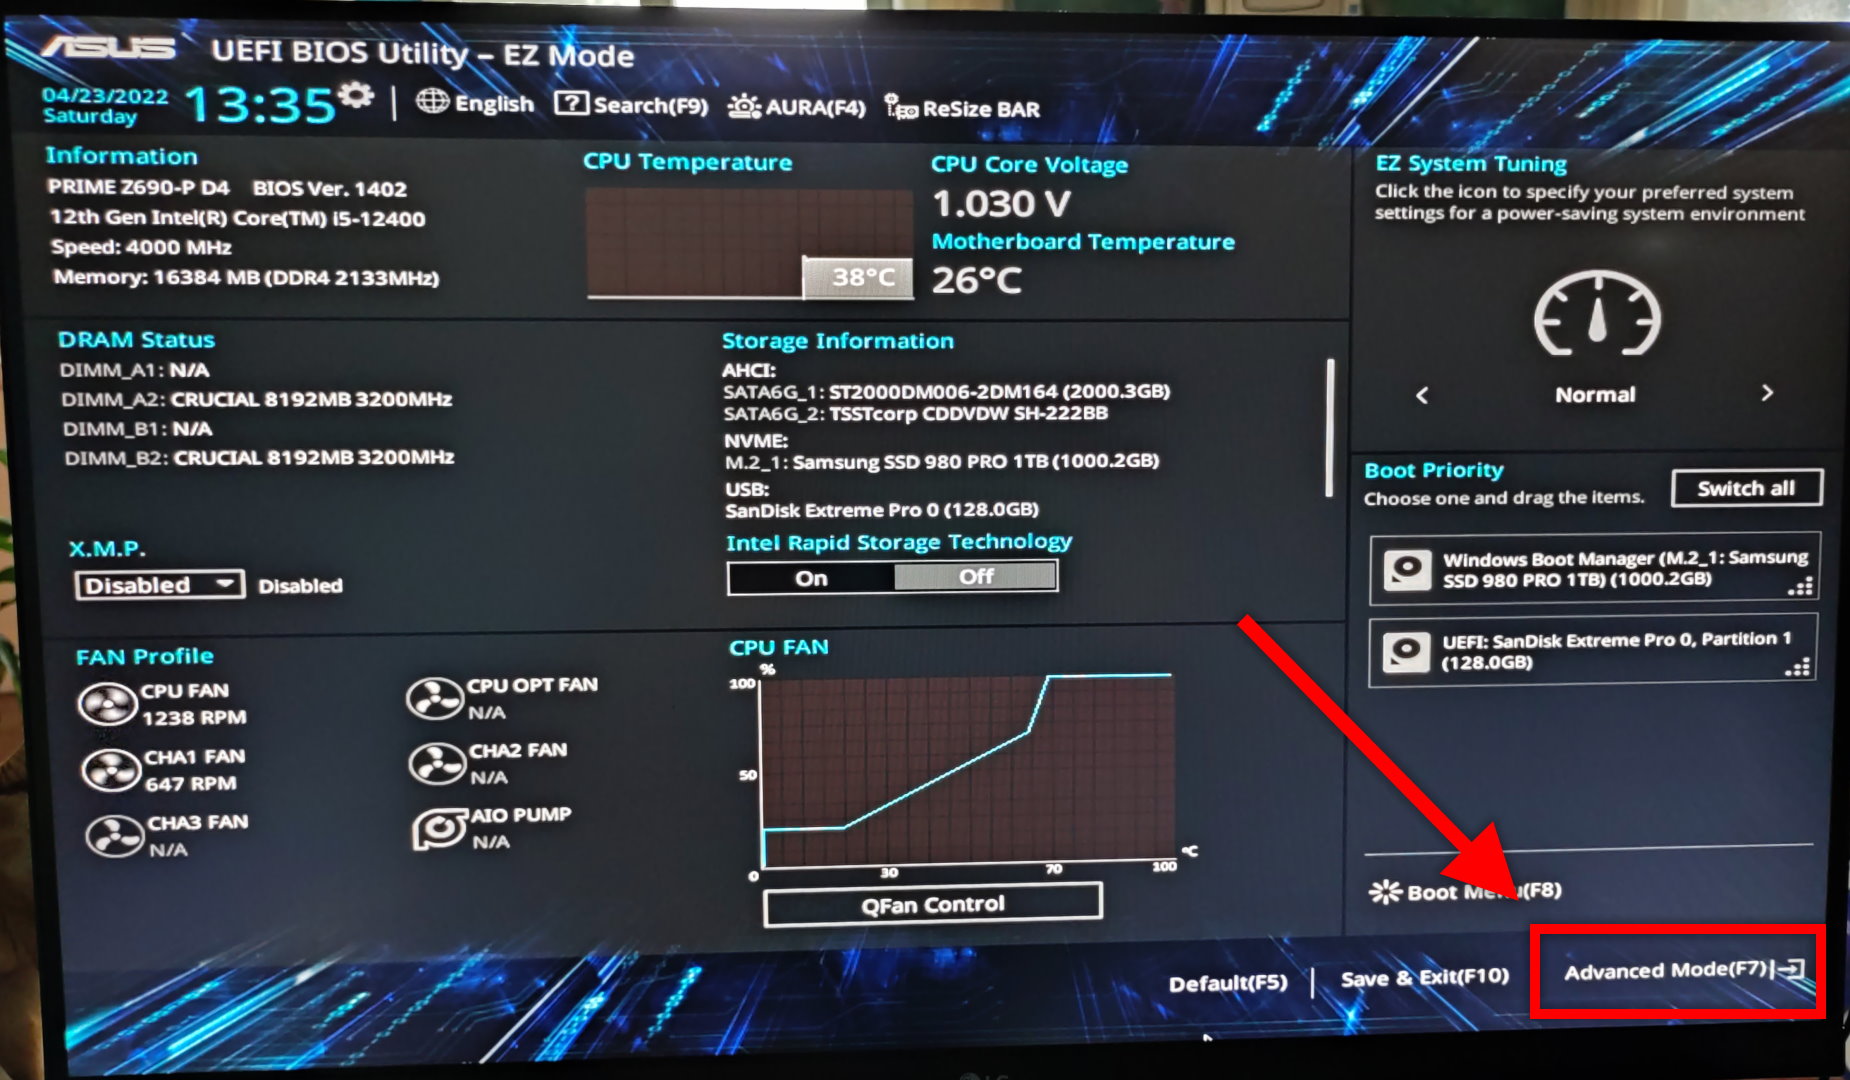 New M.2 SSD Not Showing Up In BIOS [How to fix]